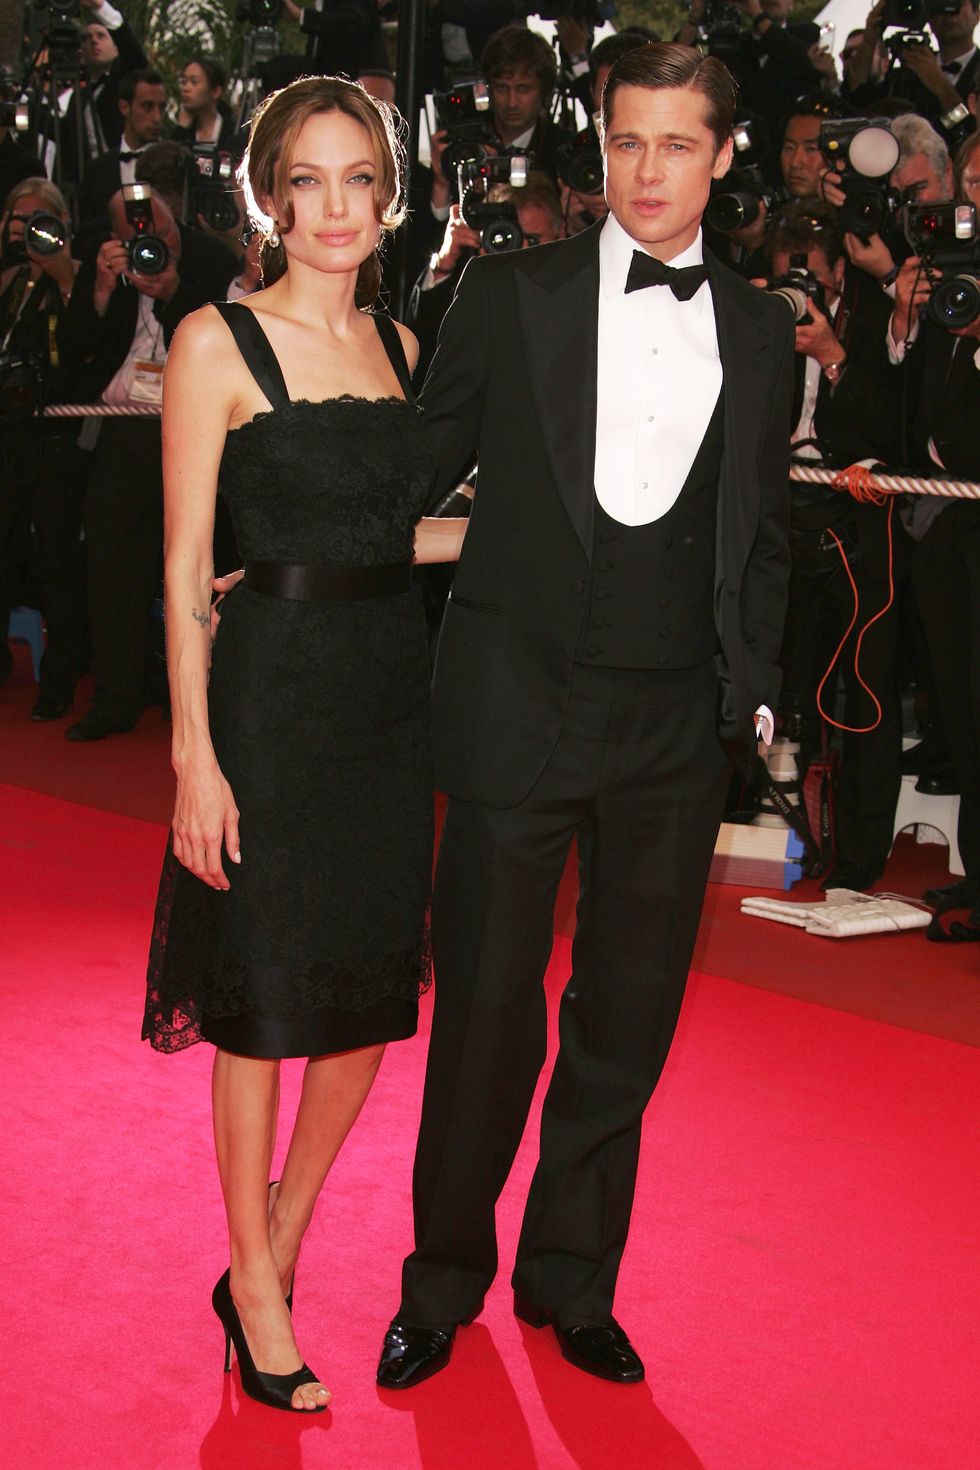 CANNES, FRANCE - MAY 21:  (R-L) Actors Brad Pitt and Angelina Jolie attend the premiere for the film "A Mighty Heart" at the Palais des Festivals during the 60th International Cannes Film Festival on May 21, 2007 in Cannes, France.  (Photo by Peter Kramer/Getty Images) *** Local Caption *** Brad Pitt;Angelina Jolie